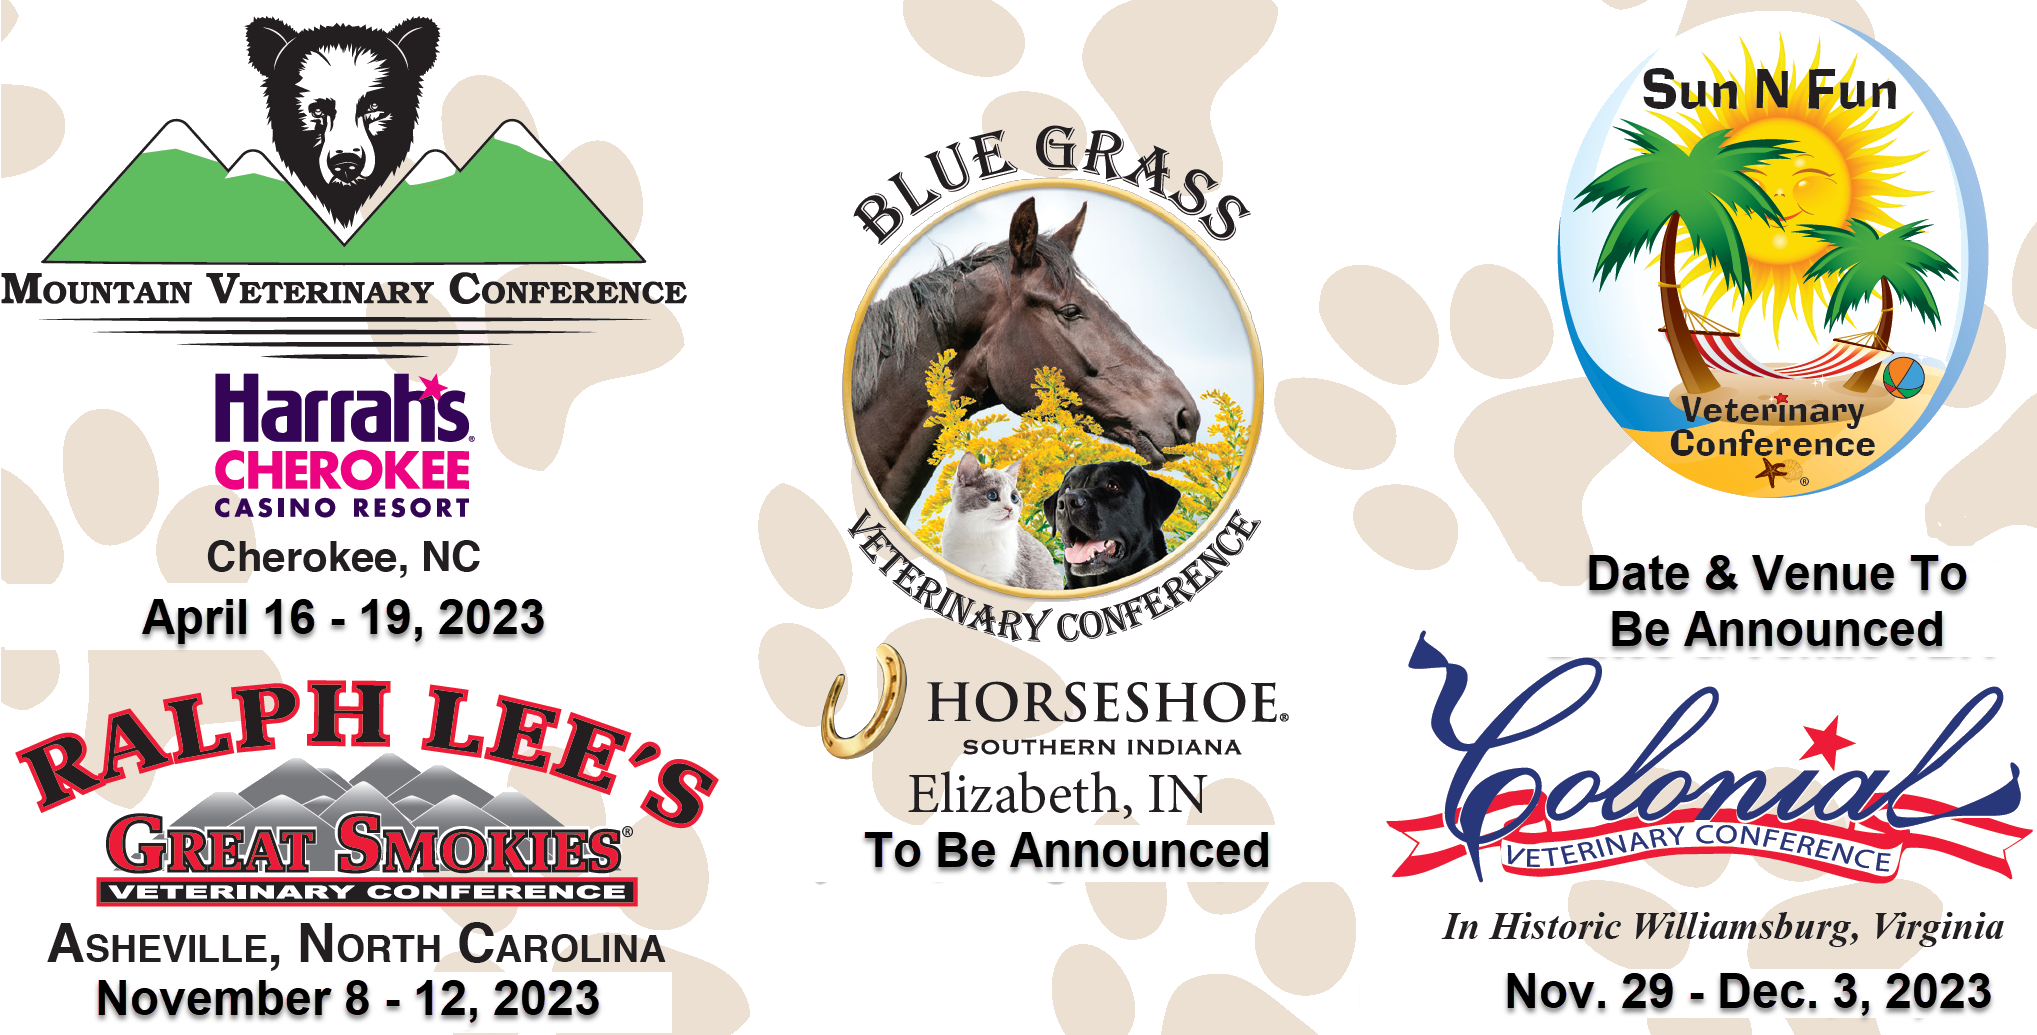 Our Conferences for 2020: Mountian Veterinary Conference, Sun N Fun Veterinary Conference, Bluegrass Veterinary Conference, Ralph Lee's Great Smokies Veterinary Conference and Colonial Veterinar Conference